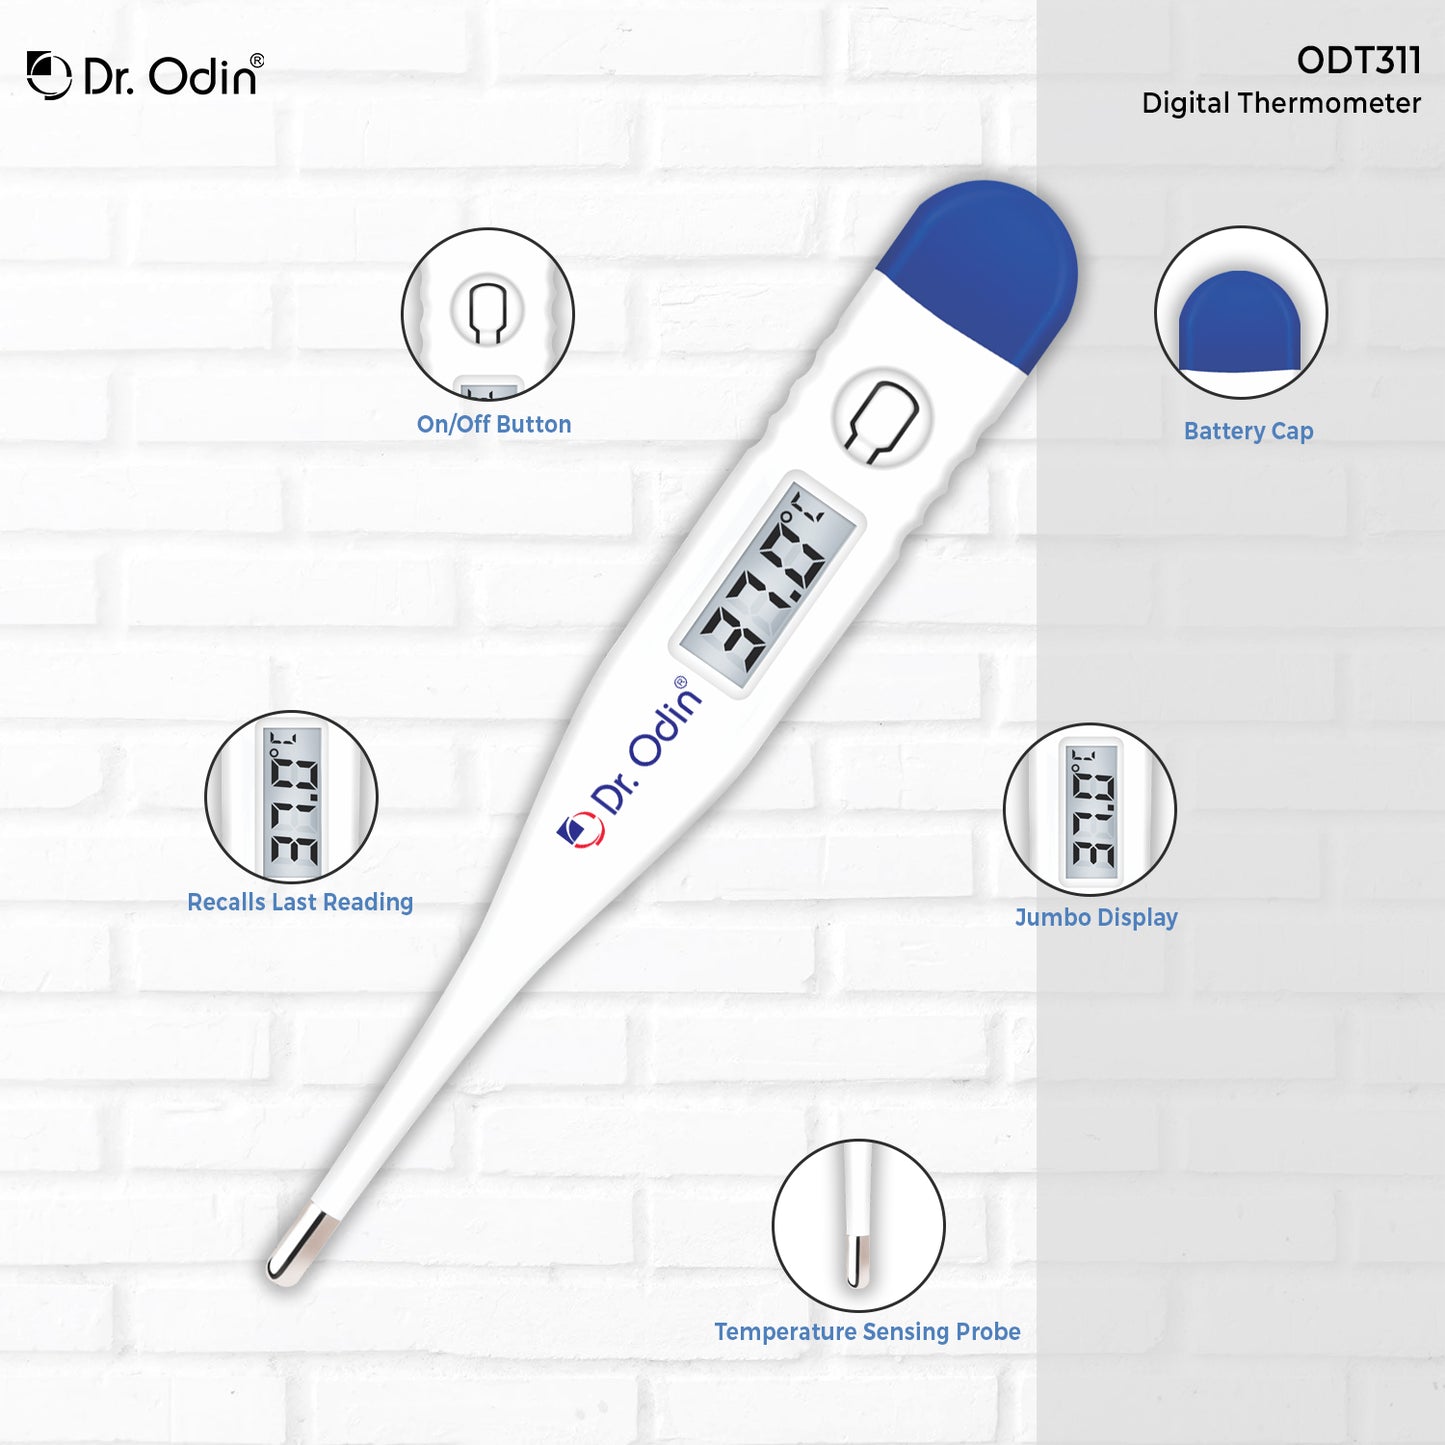 Digital Thermometer ODT311